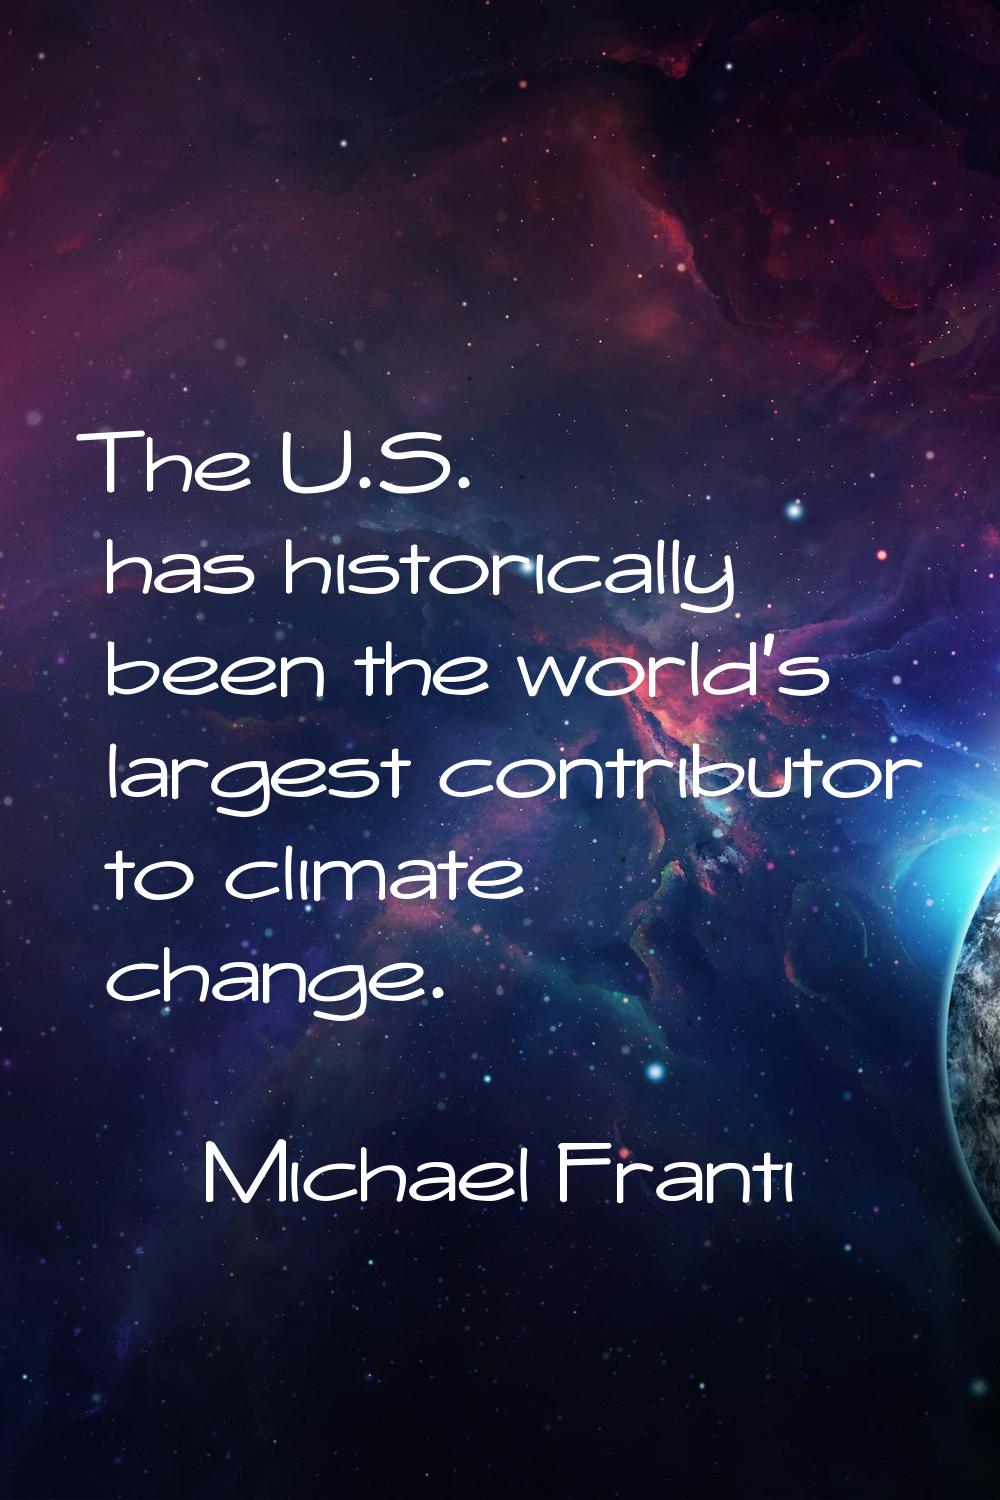 The U.S. has historically been the world's largest contributor to climate change.